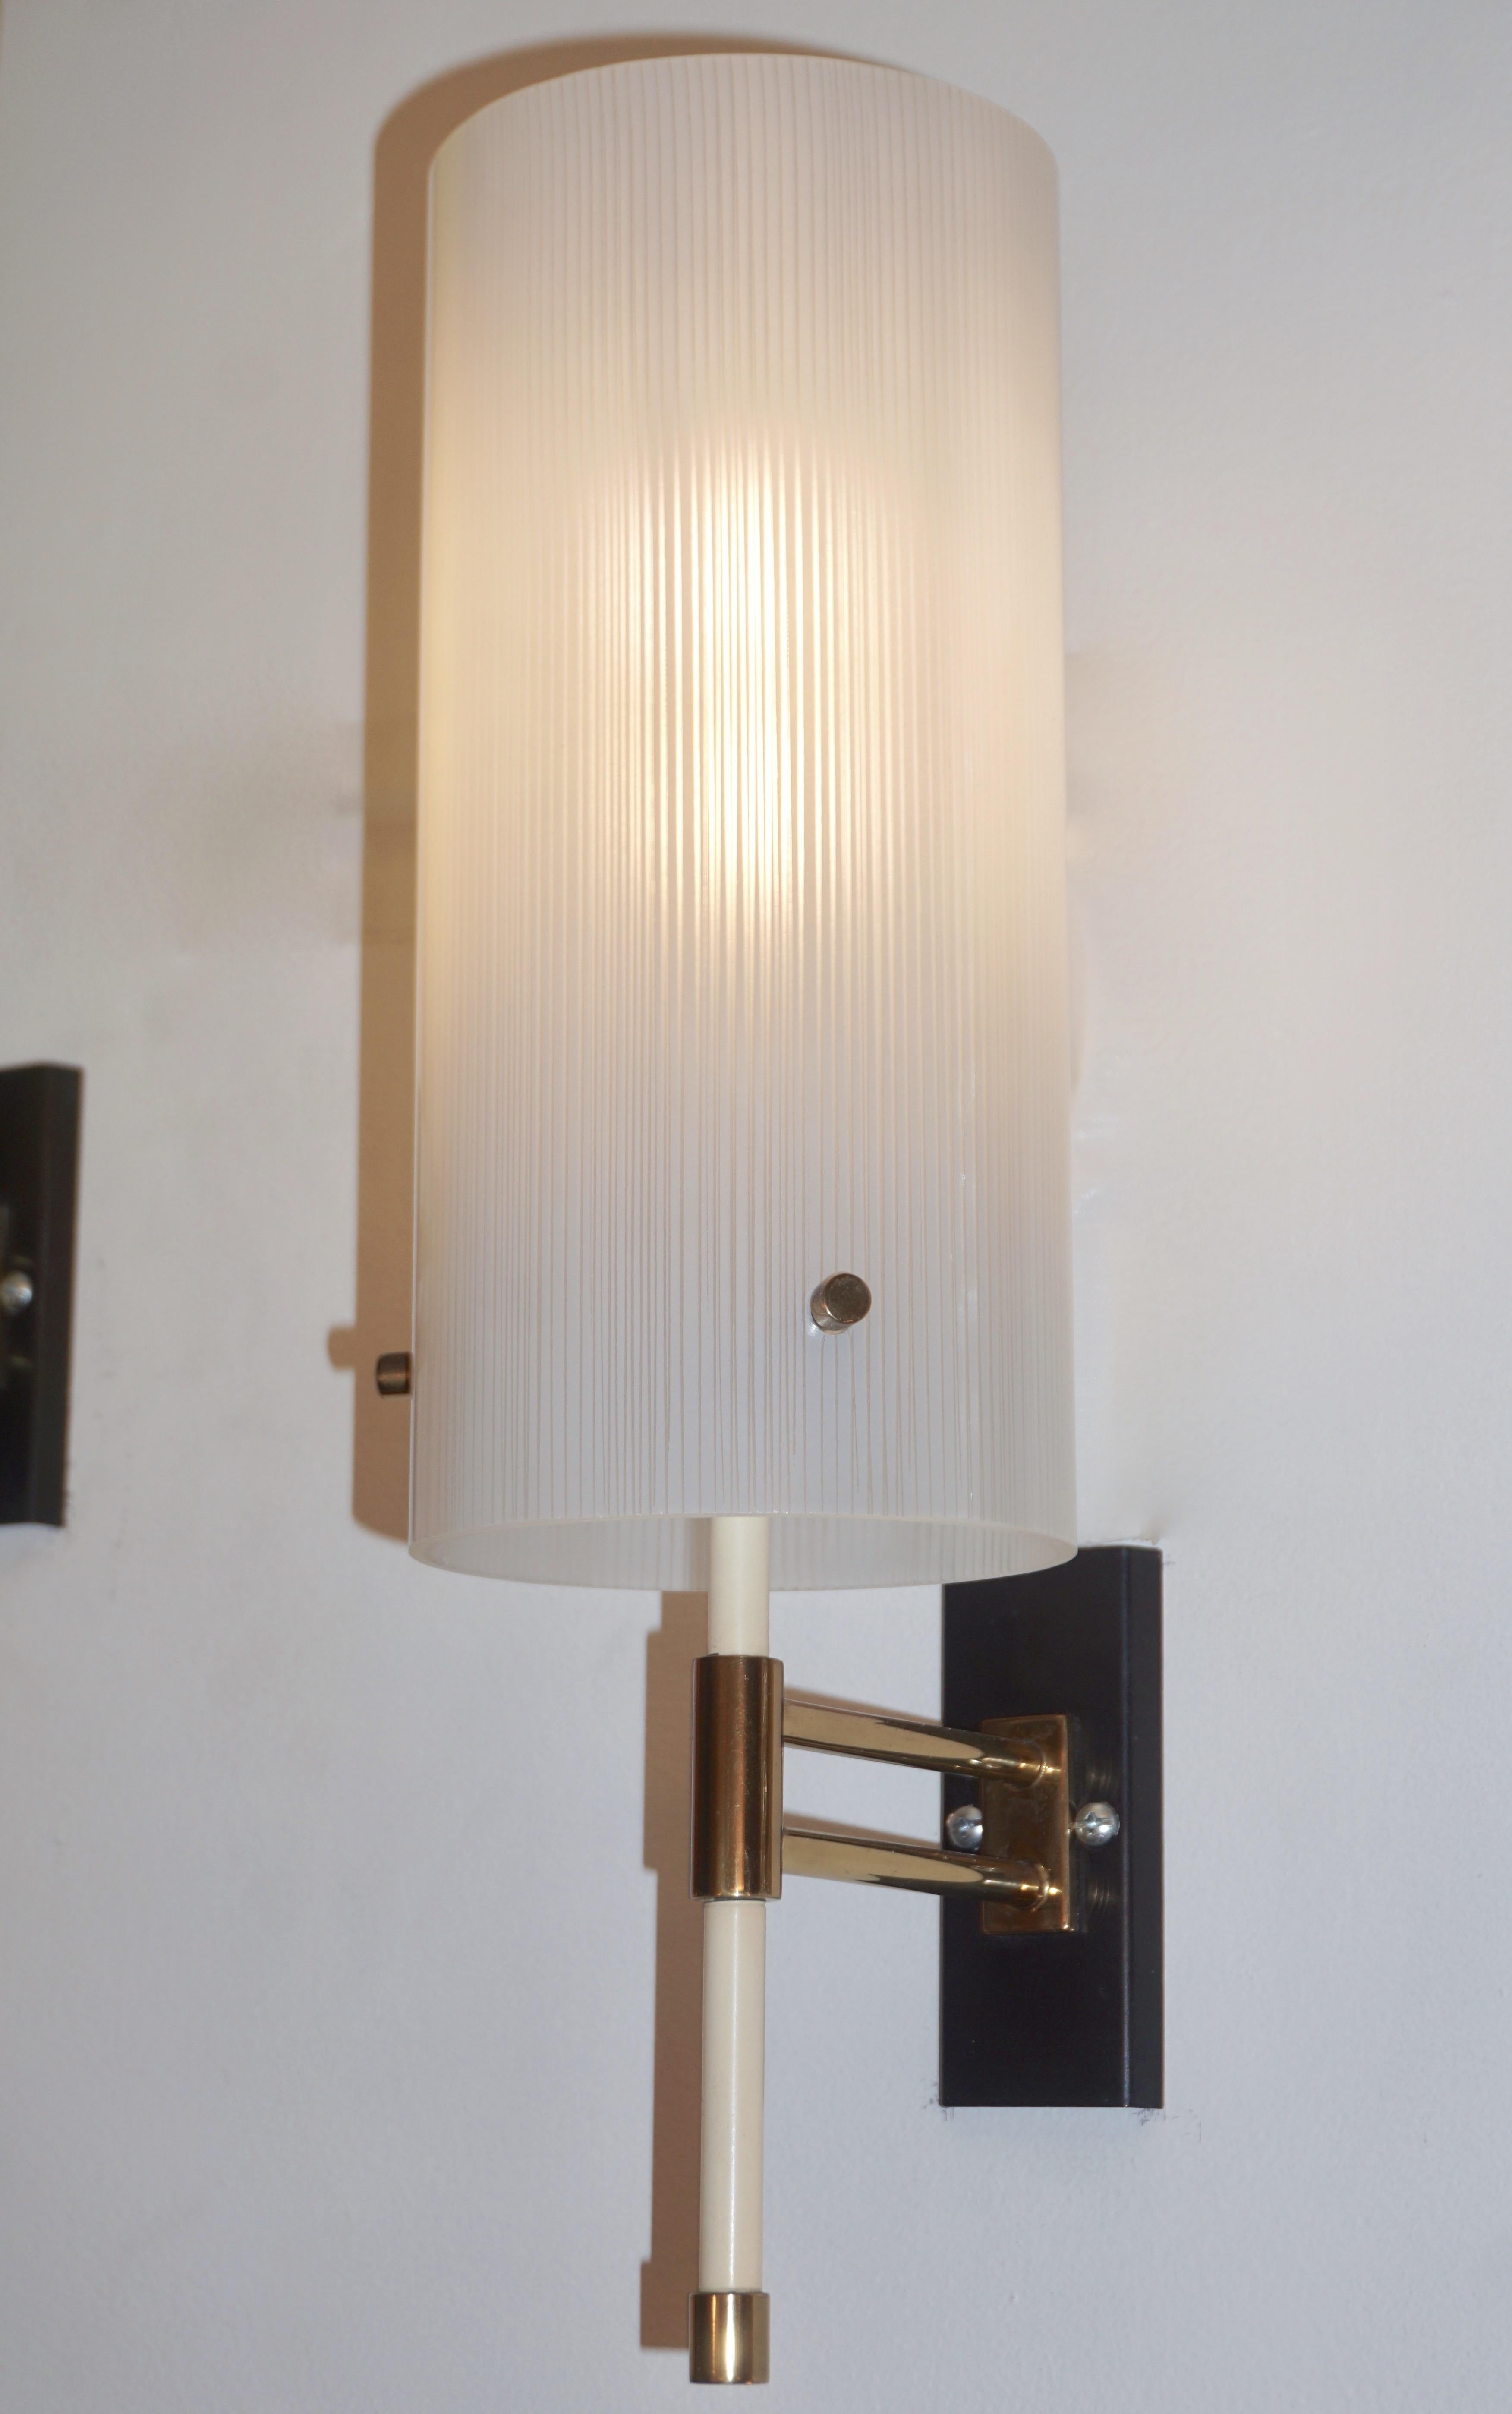 Rare Mid-Century Modern glass sconce, entirely handcrafted in Italy by Casey Fantin, Florence, a wonderful example of Minimalist midcentury Italian design. High quality of manufacturing with slender cylindrical shade (9.5 in. height x 4.5 diameter),